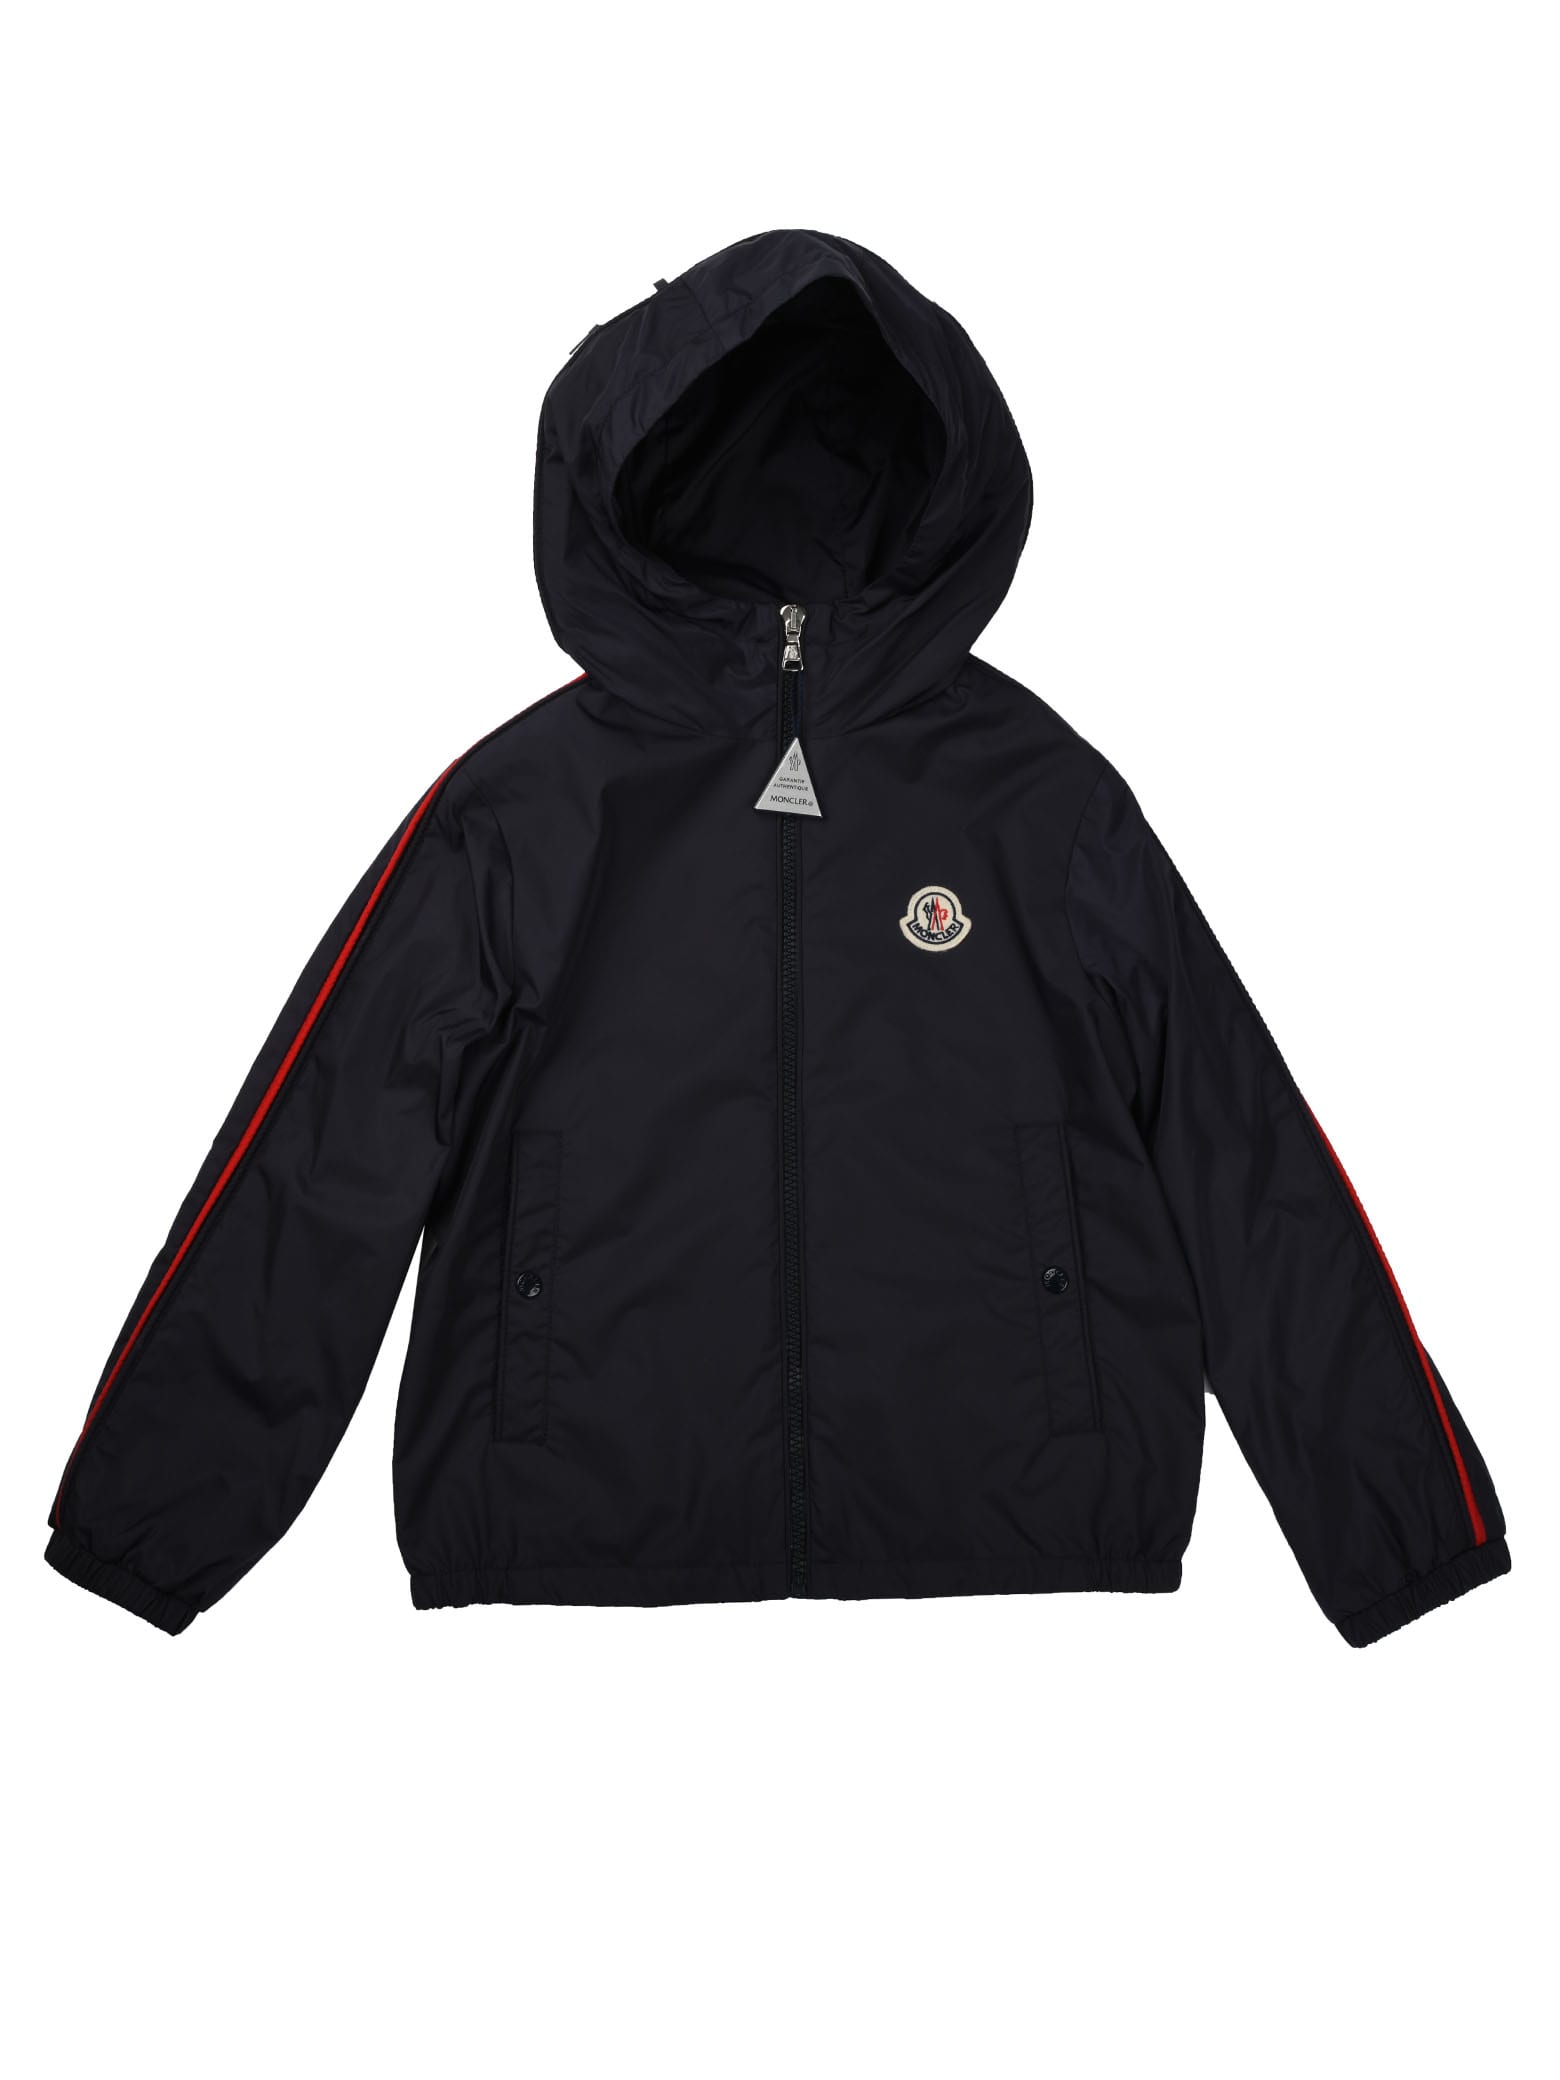 Boys' MONCLER Jackets On Sale, Up To 70% Off | ModeSens